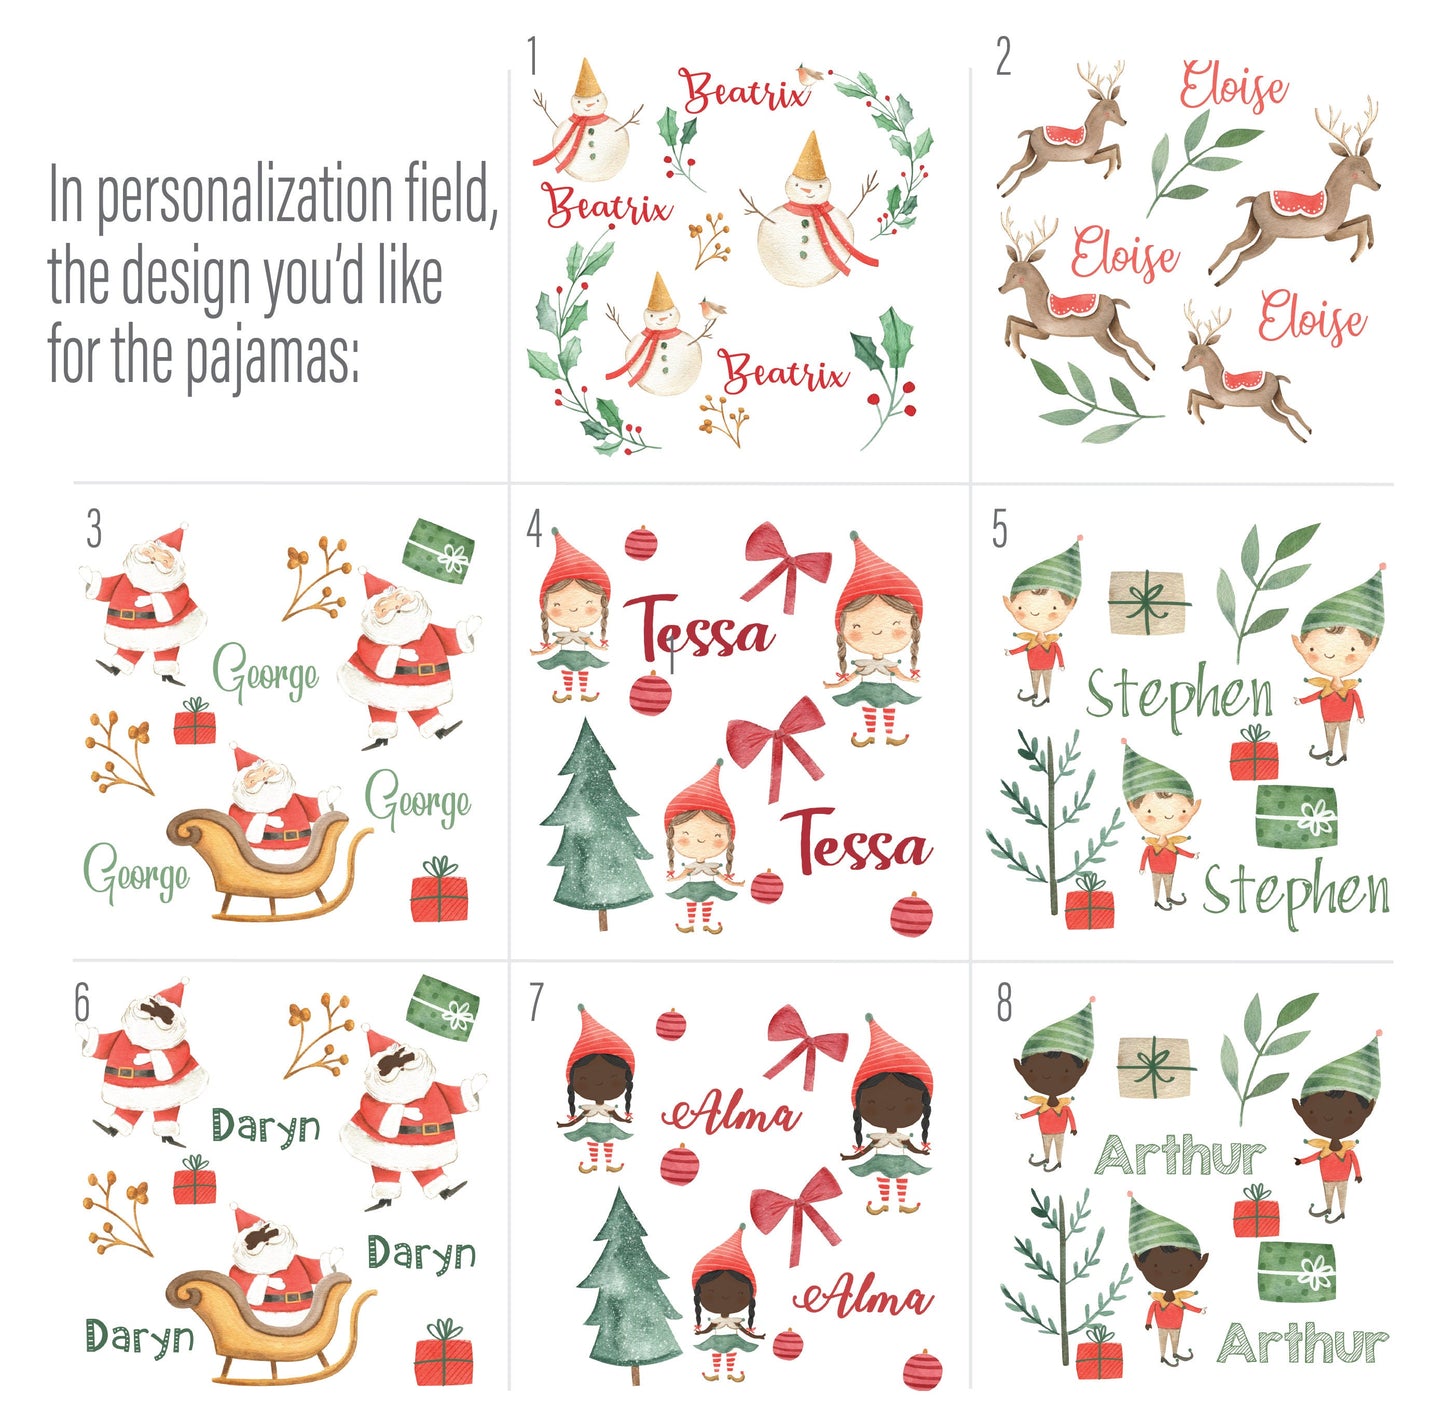 Personalized Christmas Pajamas for Infants, Children, and Families with Elves, Snowman, Reindeer, Santa, Holly, and Candy Canes